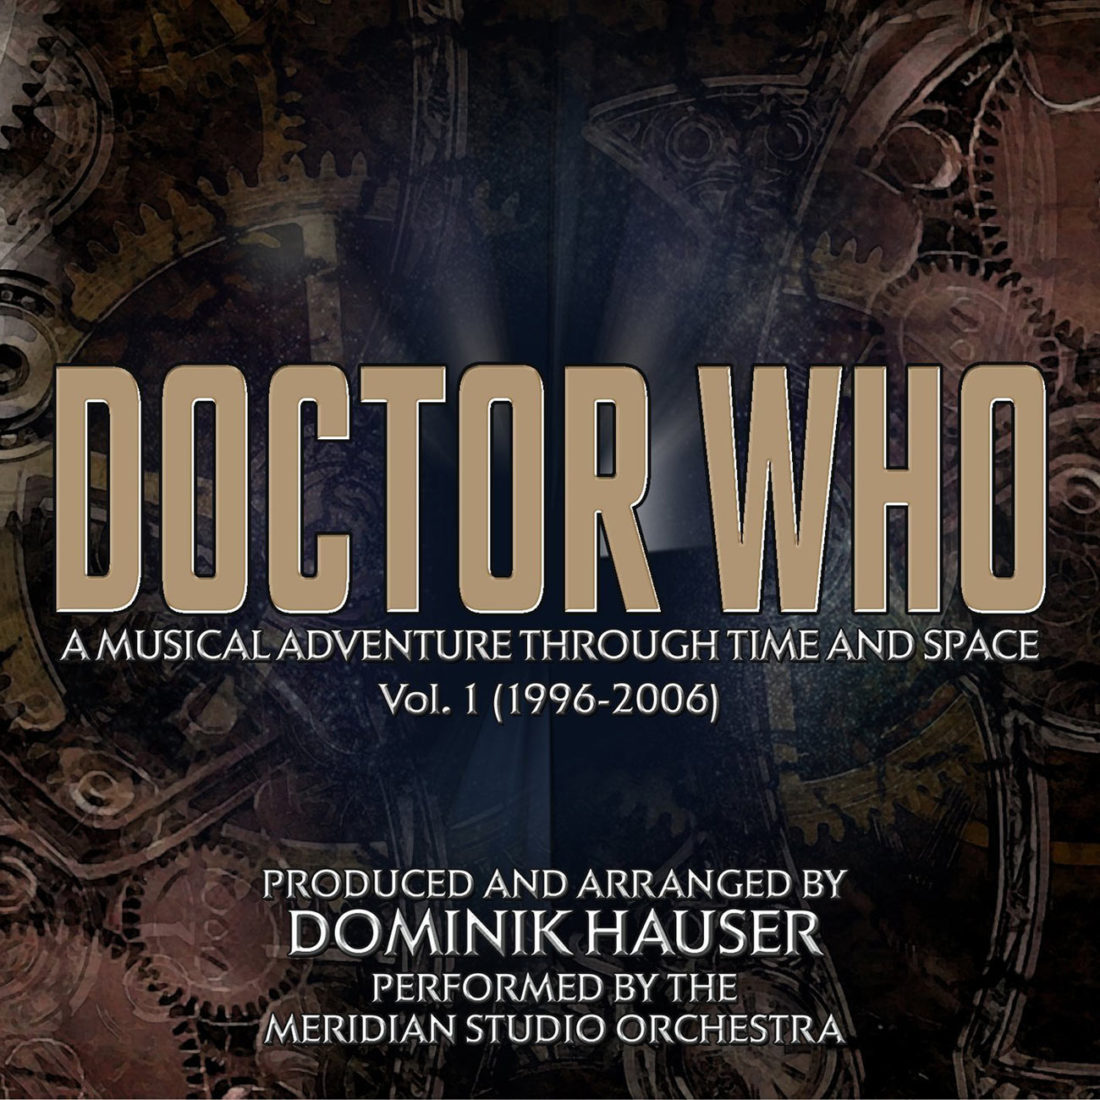 Doctor Who: A Musical Adventure Through Space and Time Vol. One Limited Edition Soundtrack